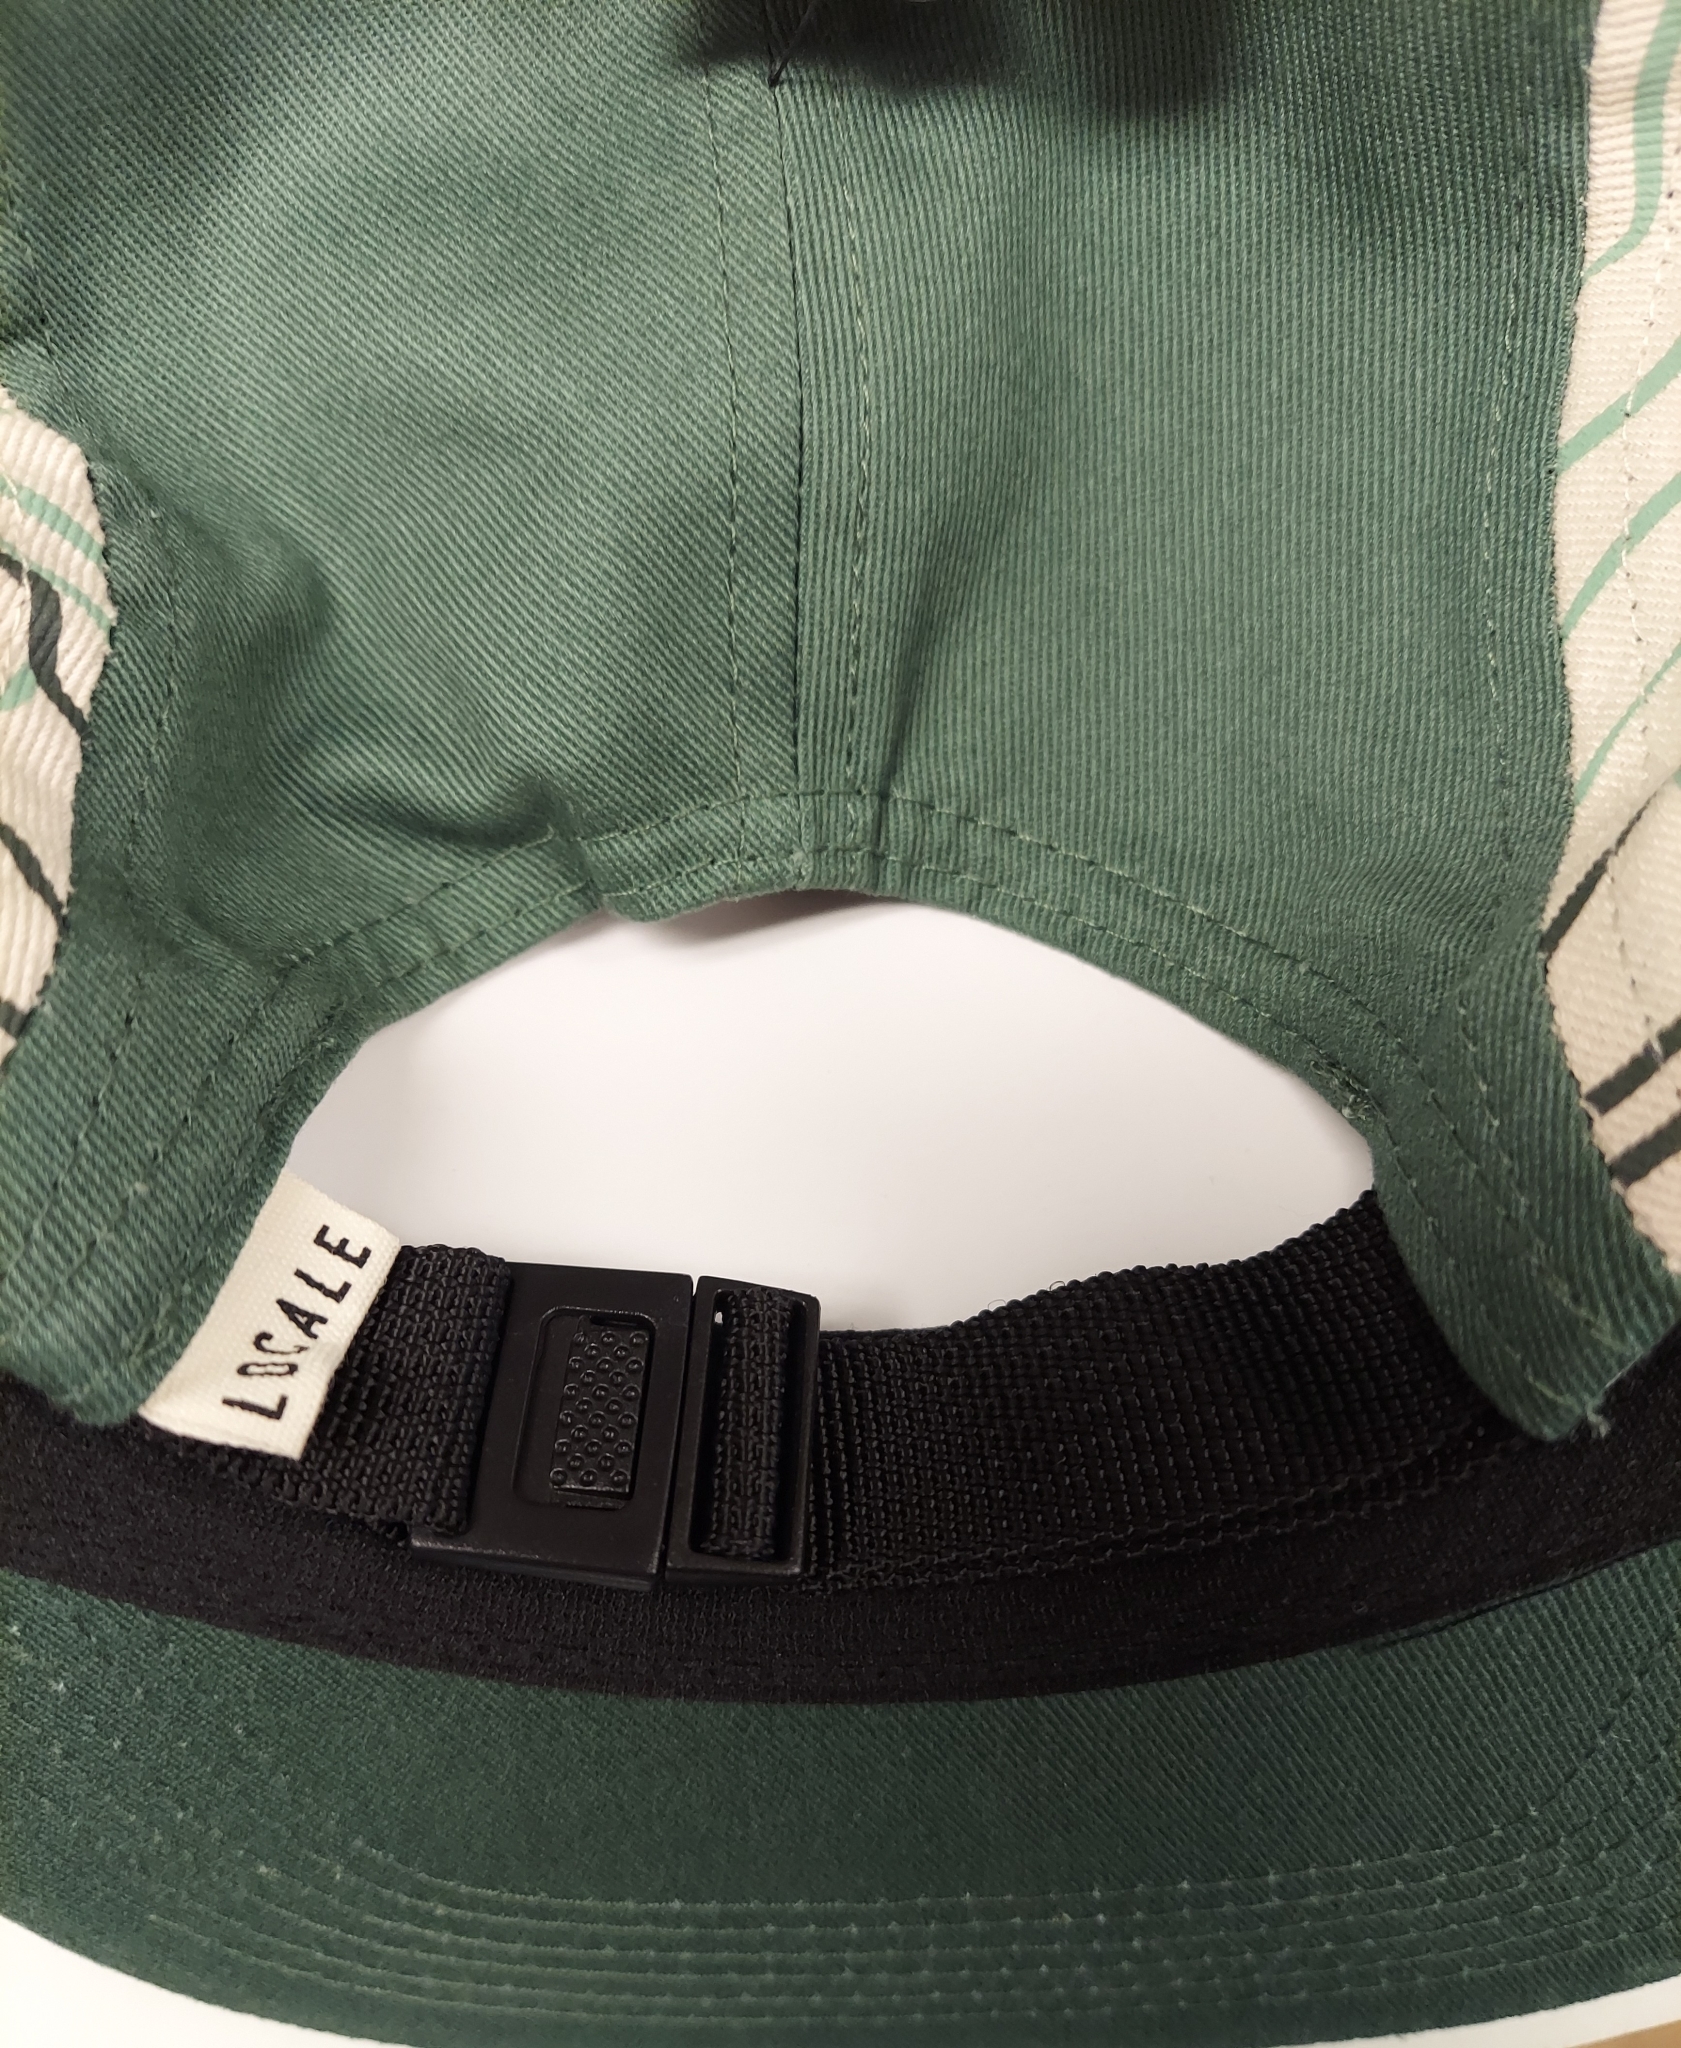 Close-up of the inside of a Hat - RMNP Green Camper showing the black adjustable strap and the tag with "LOCALE" written on it.